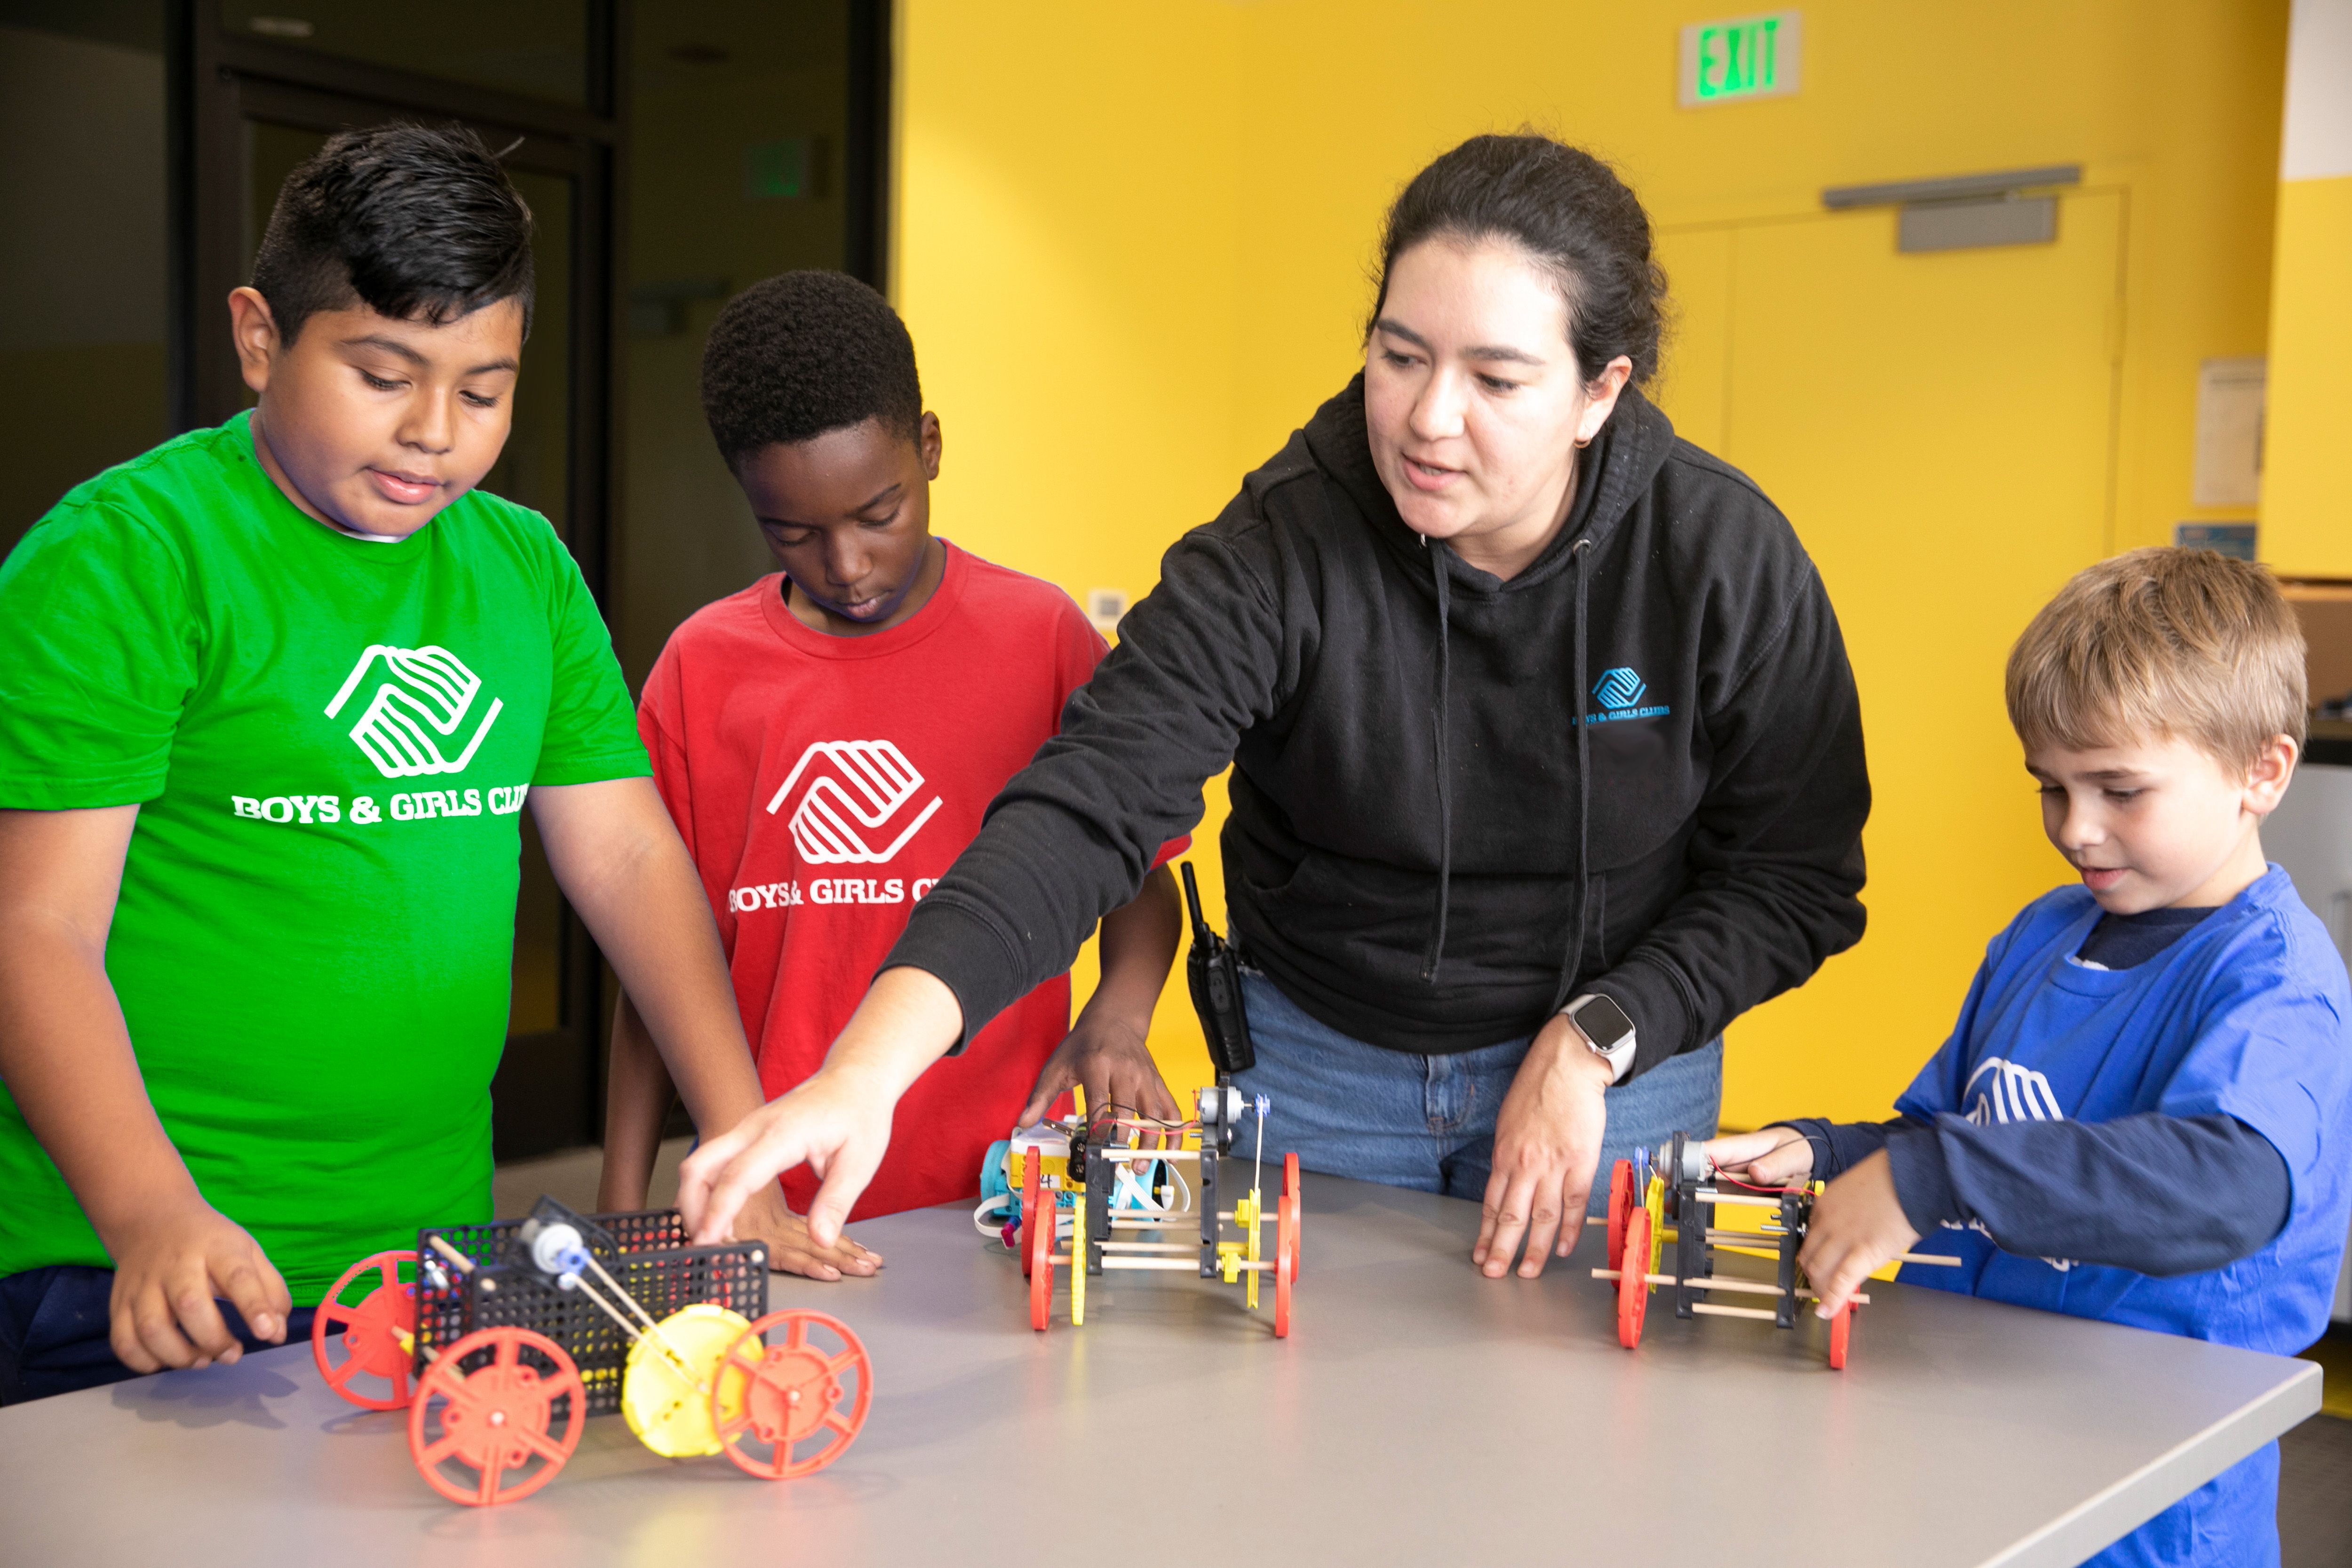 Adult mentors help students learn about math and science through hands-on projects building robots.